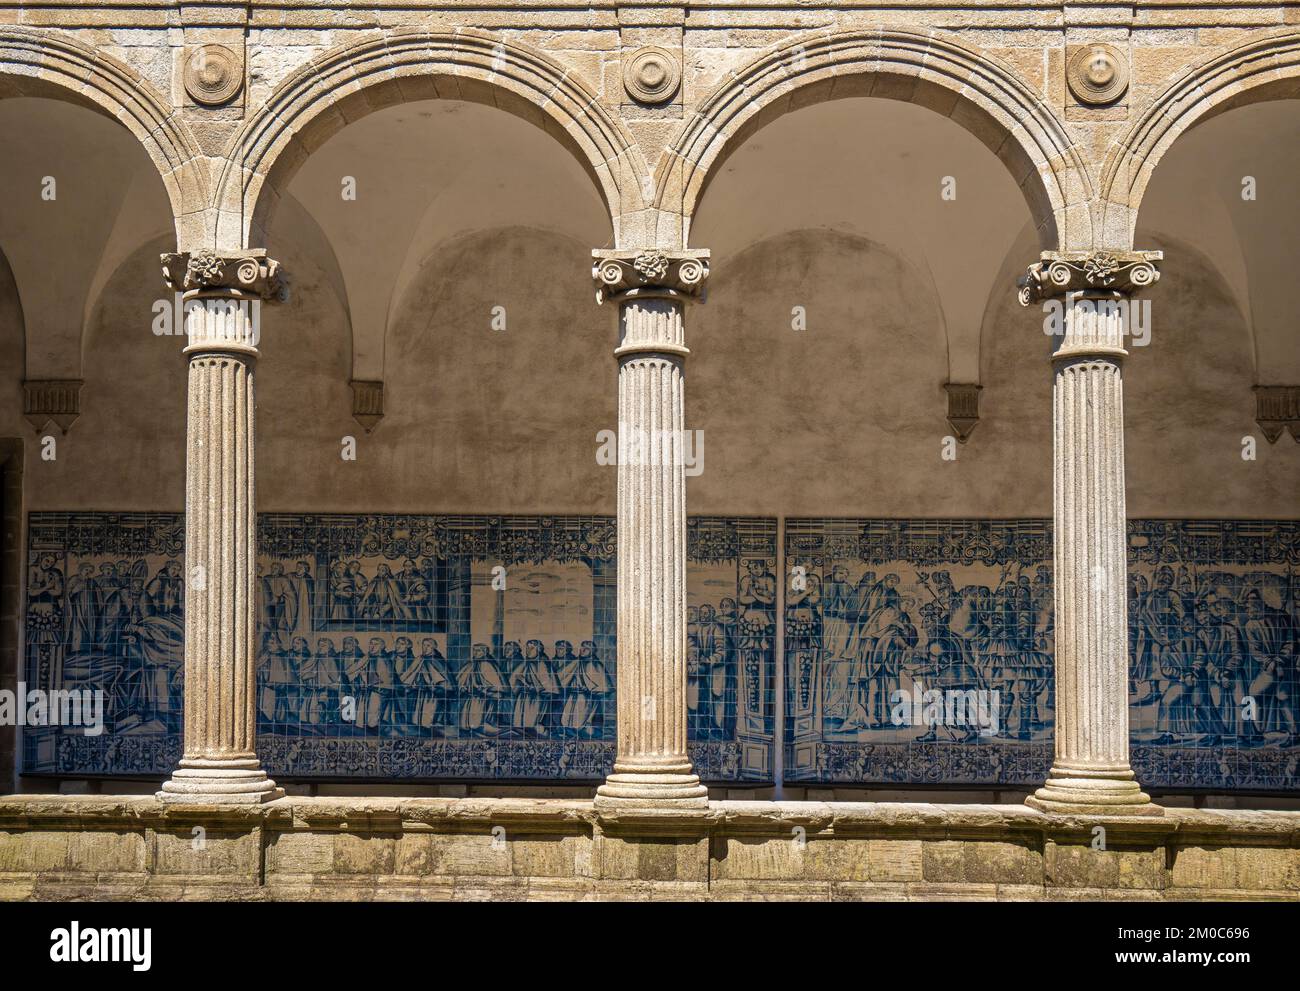 Medieval ornamented arches and behind the blue tile panels that cover the walls of the cloister of the Cathedral of Santa María de la Asunción in Vise Stock Photo